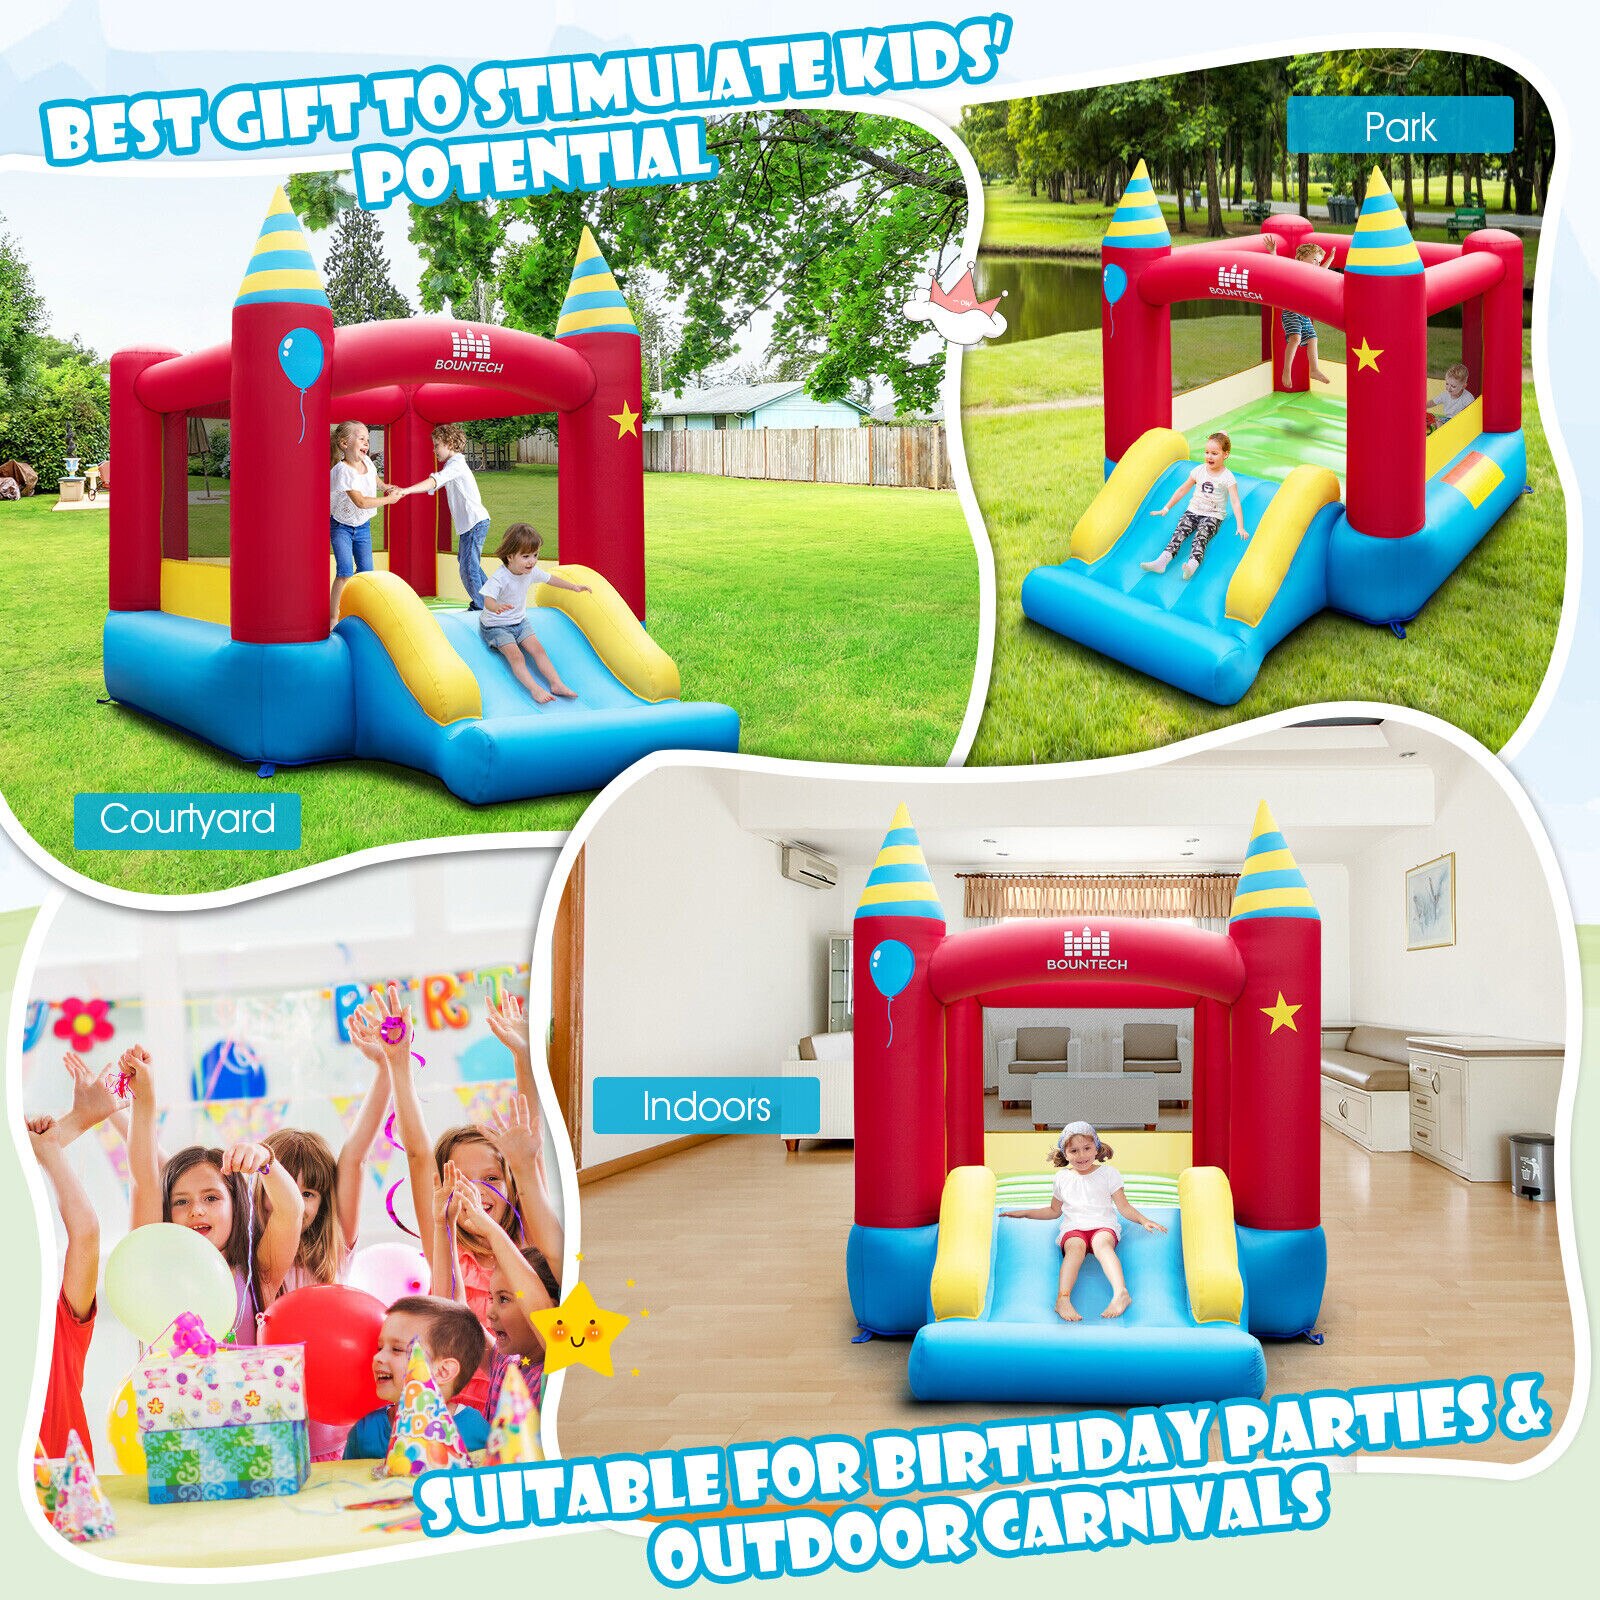 Costway-Inflatable-Bounce-Castle-Kids-Jumping-Bouncer-Indoor-Outdoor-Blower-Excluded-3